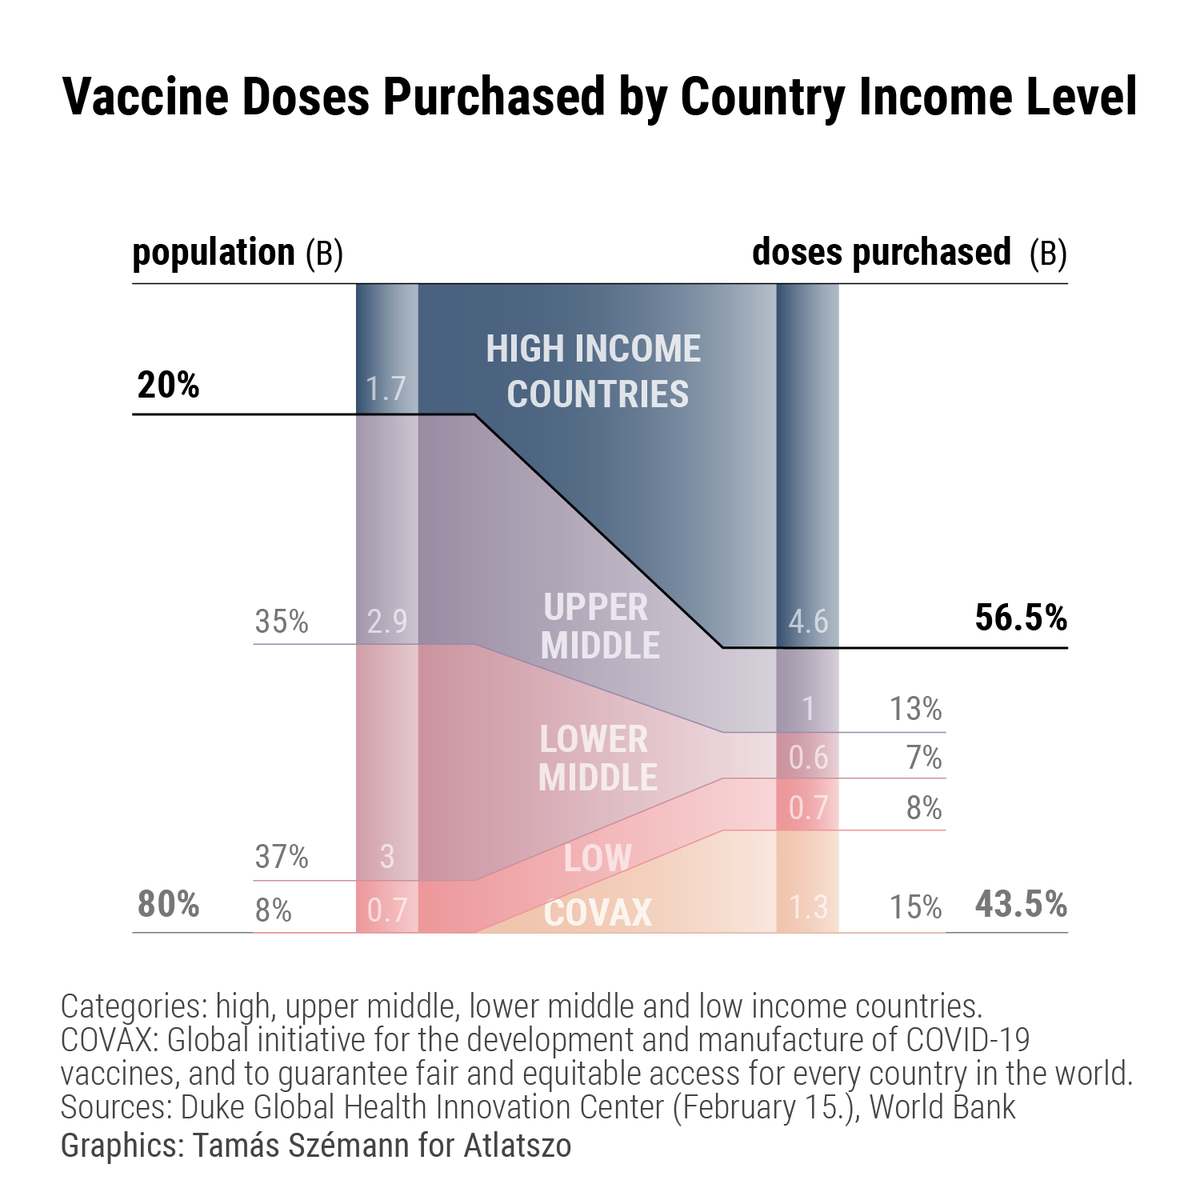 High income countries are grabbing most of the vaccines available in 2021  #vaccine #COVID19  #informationgraphics  #datajournalism #ddj #DataVisualization